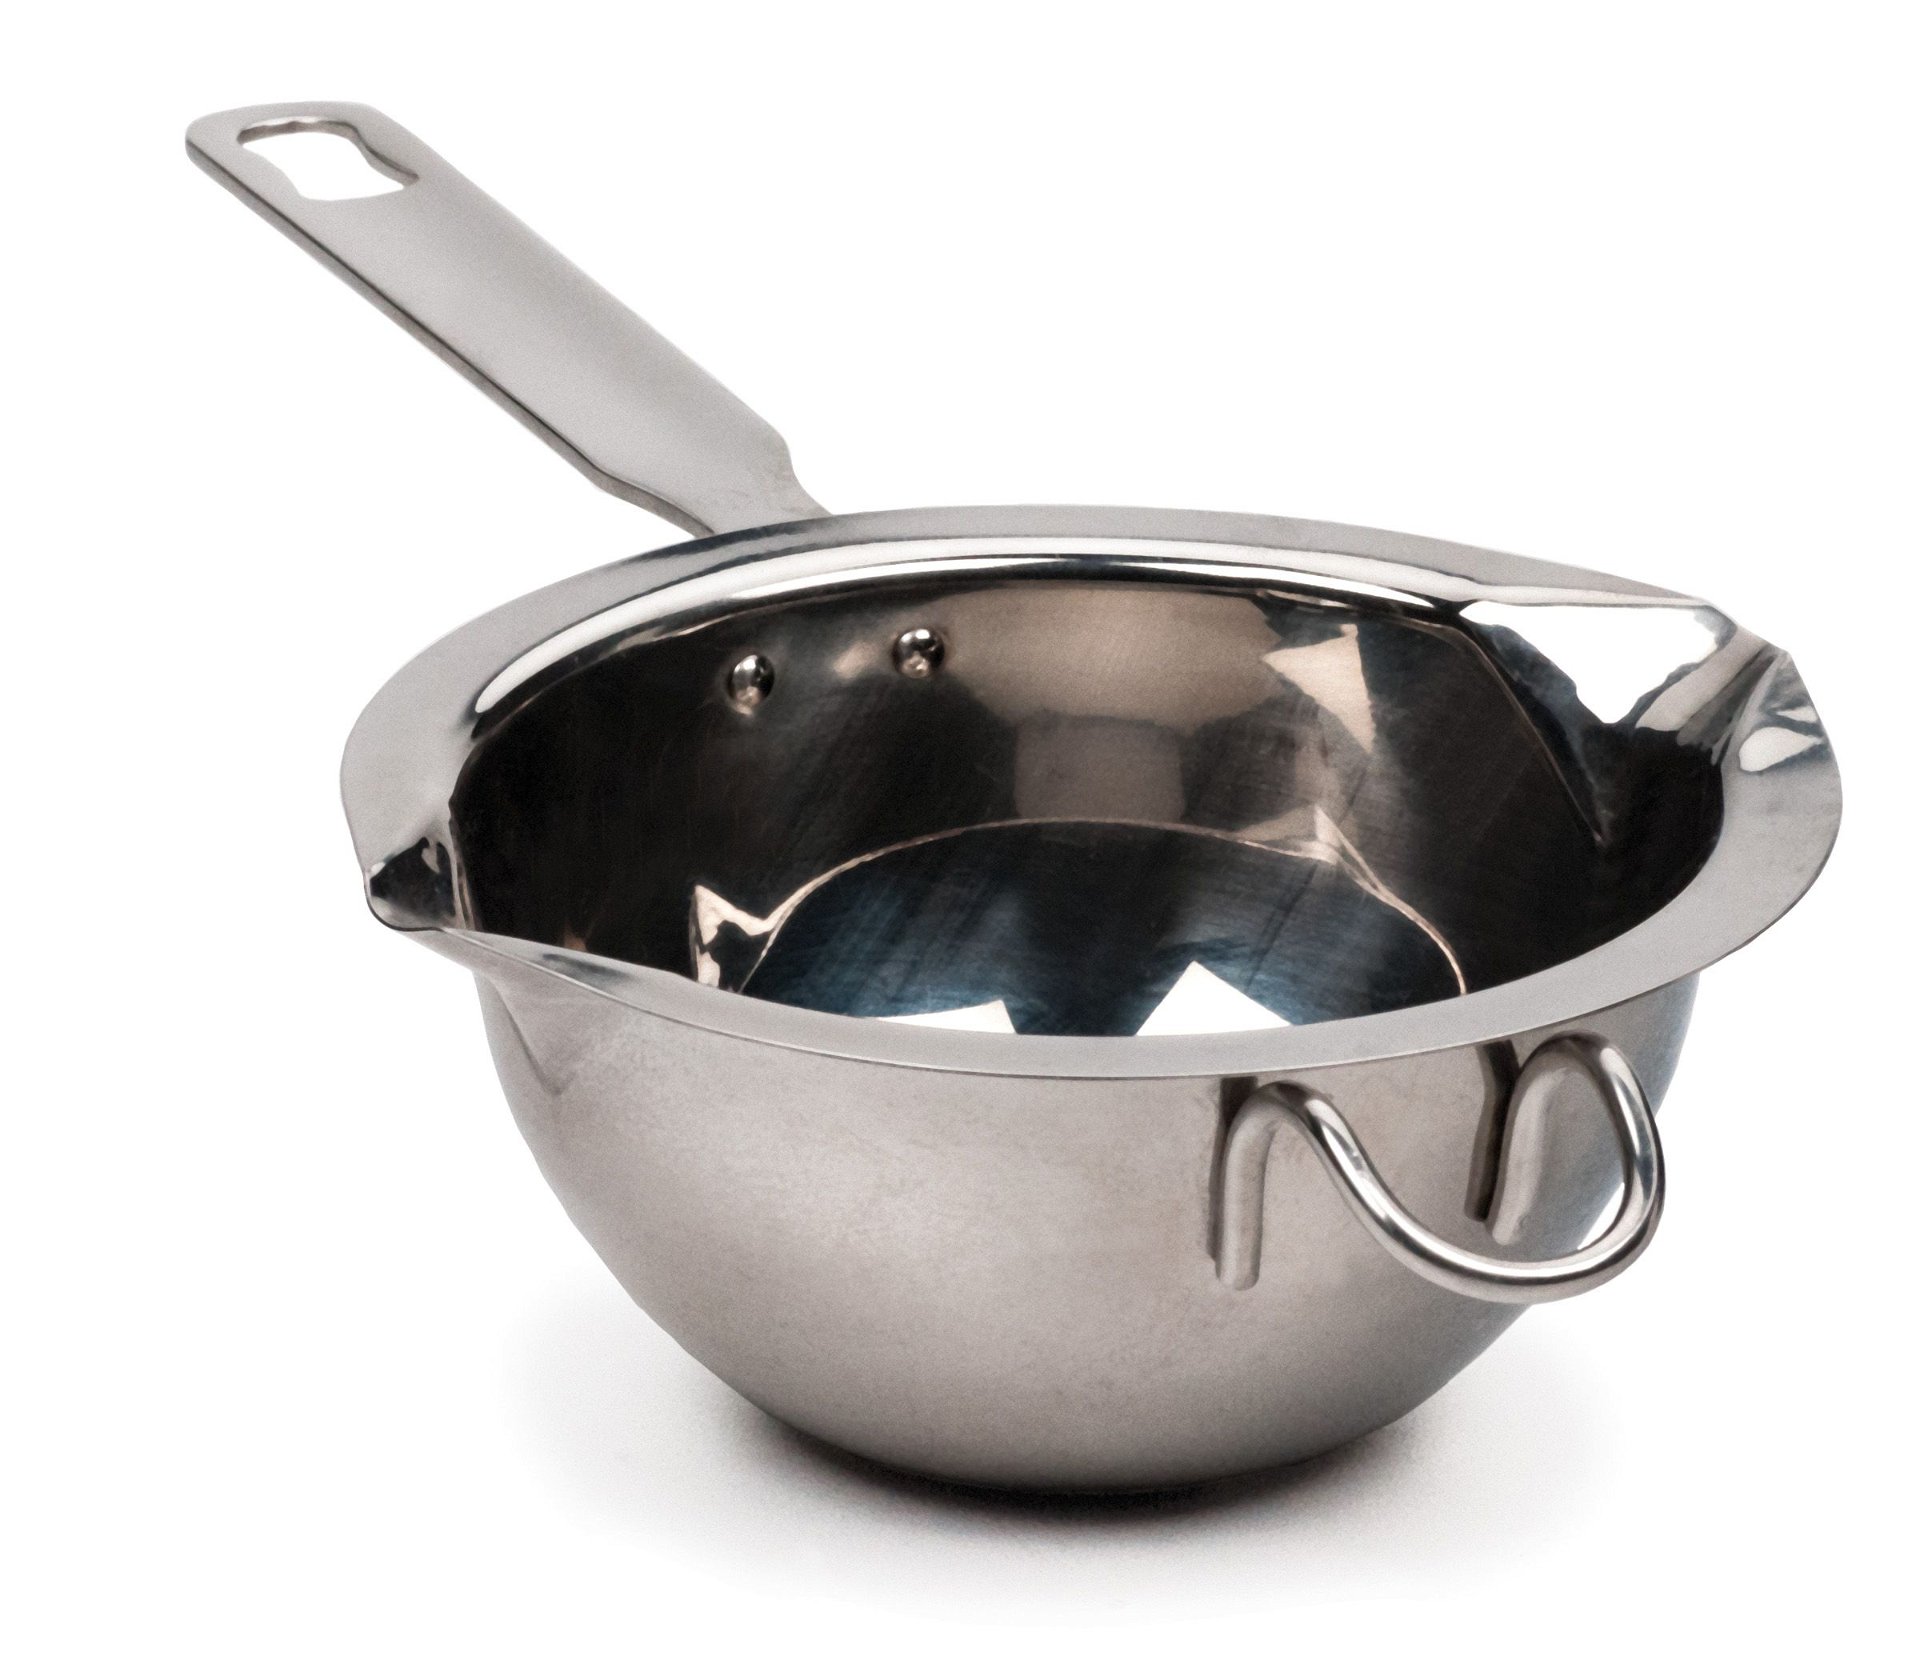 American Kitchen Cookware Stainless Steel 2 Quart Covered Saucepan with Double Boiler Insert